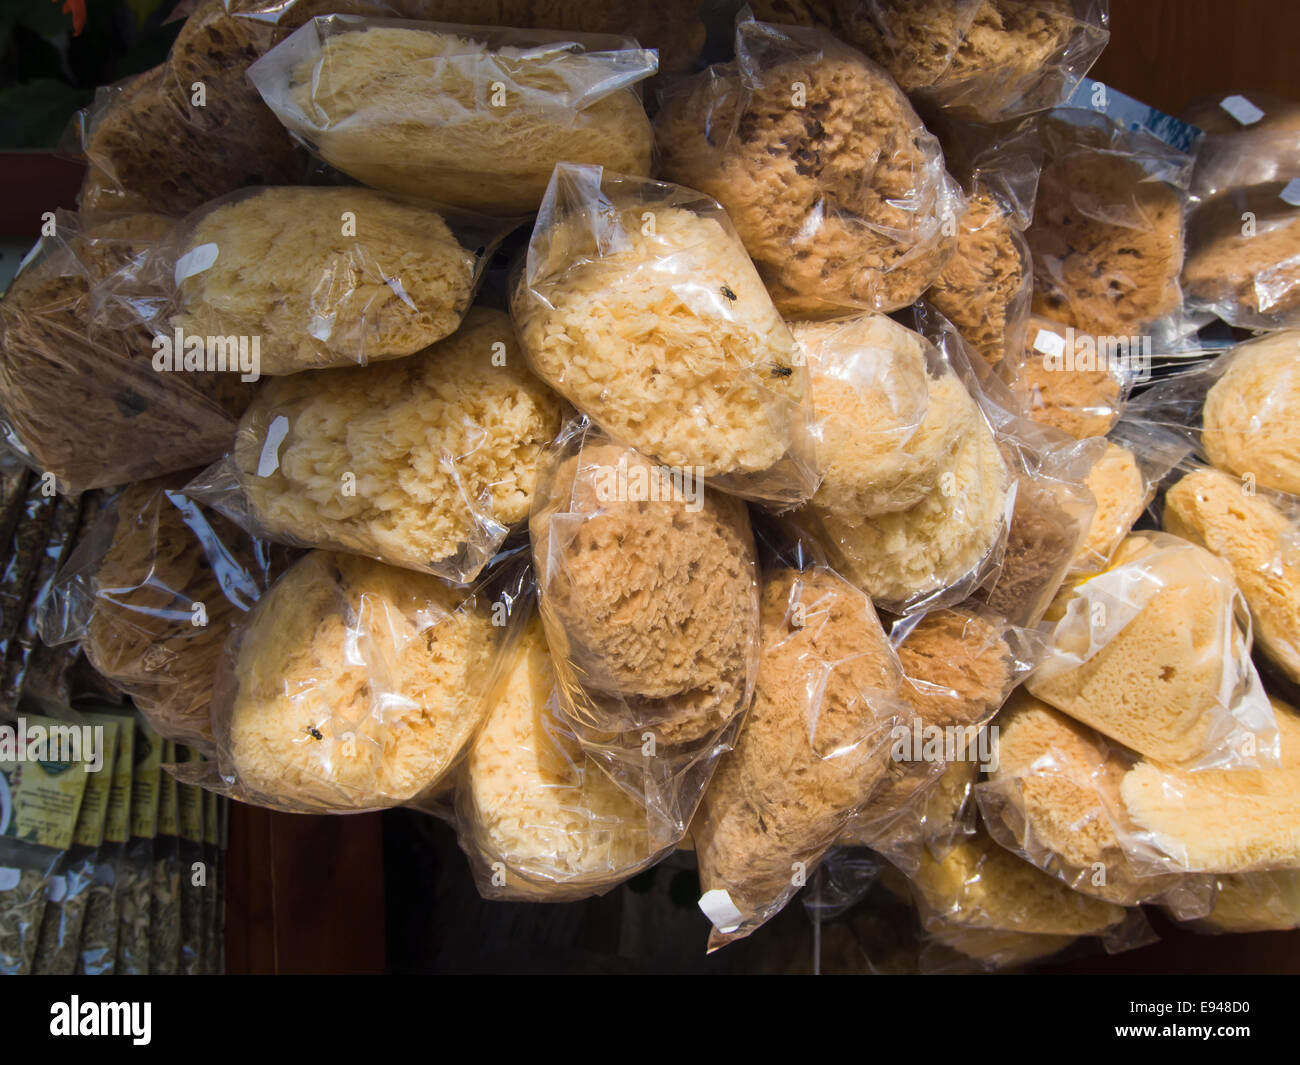 Numerous sponges in plastic wrapping, popular and useful souvenir for sale to tourists in the Greek islands, here a shop in Samos Stock Photo